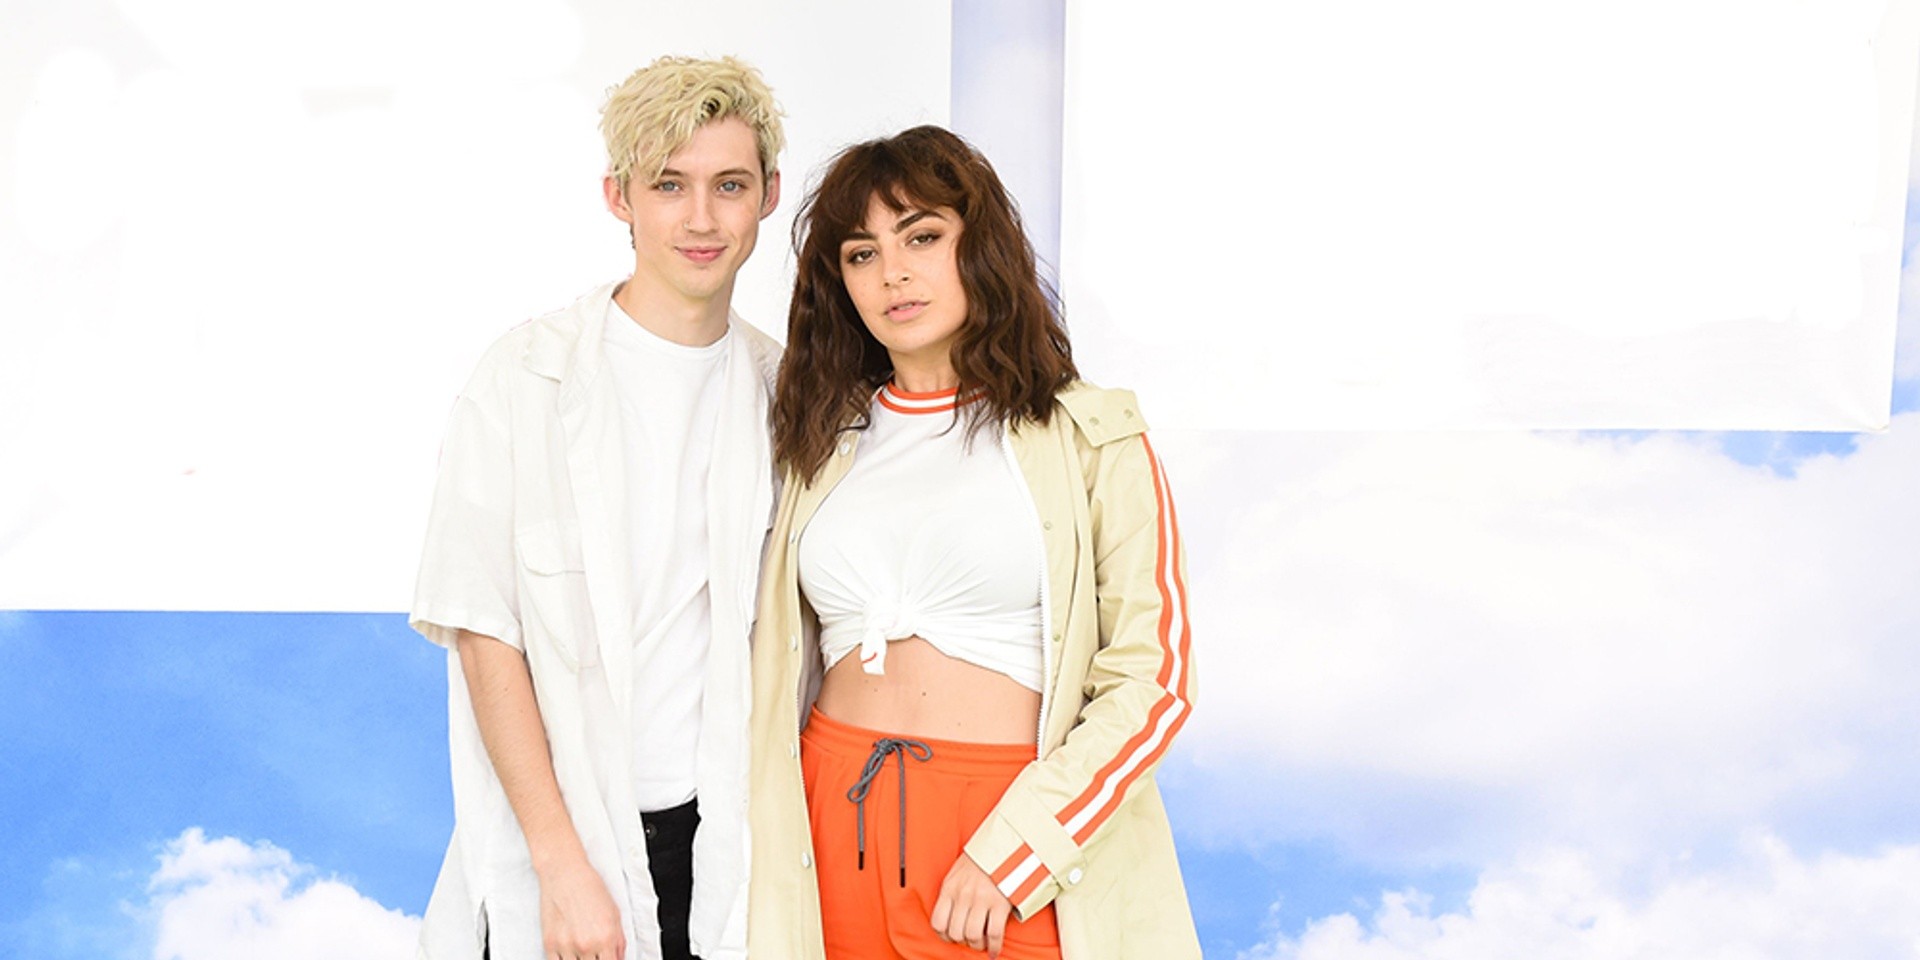 Charli XCX and Troye Sivan link up again for new single '2099'